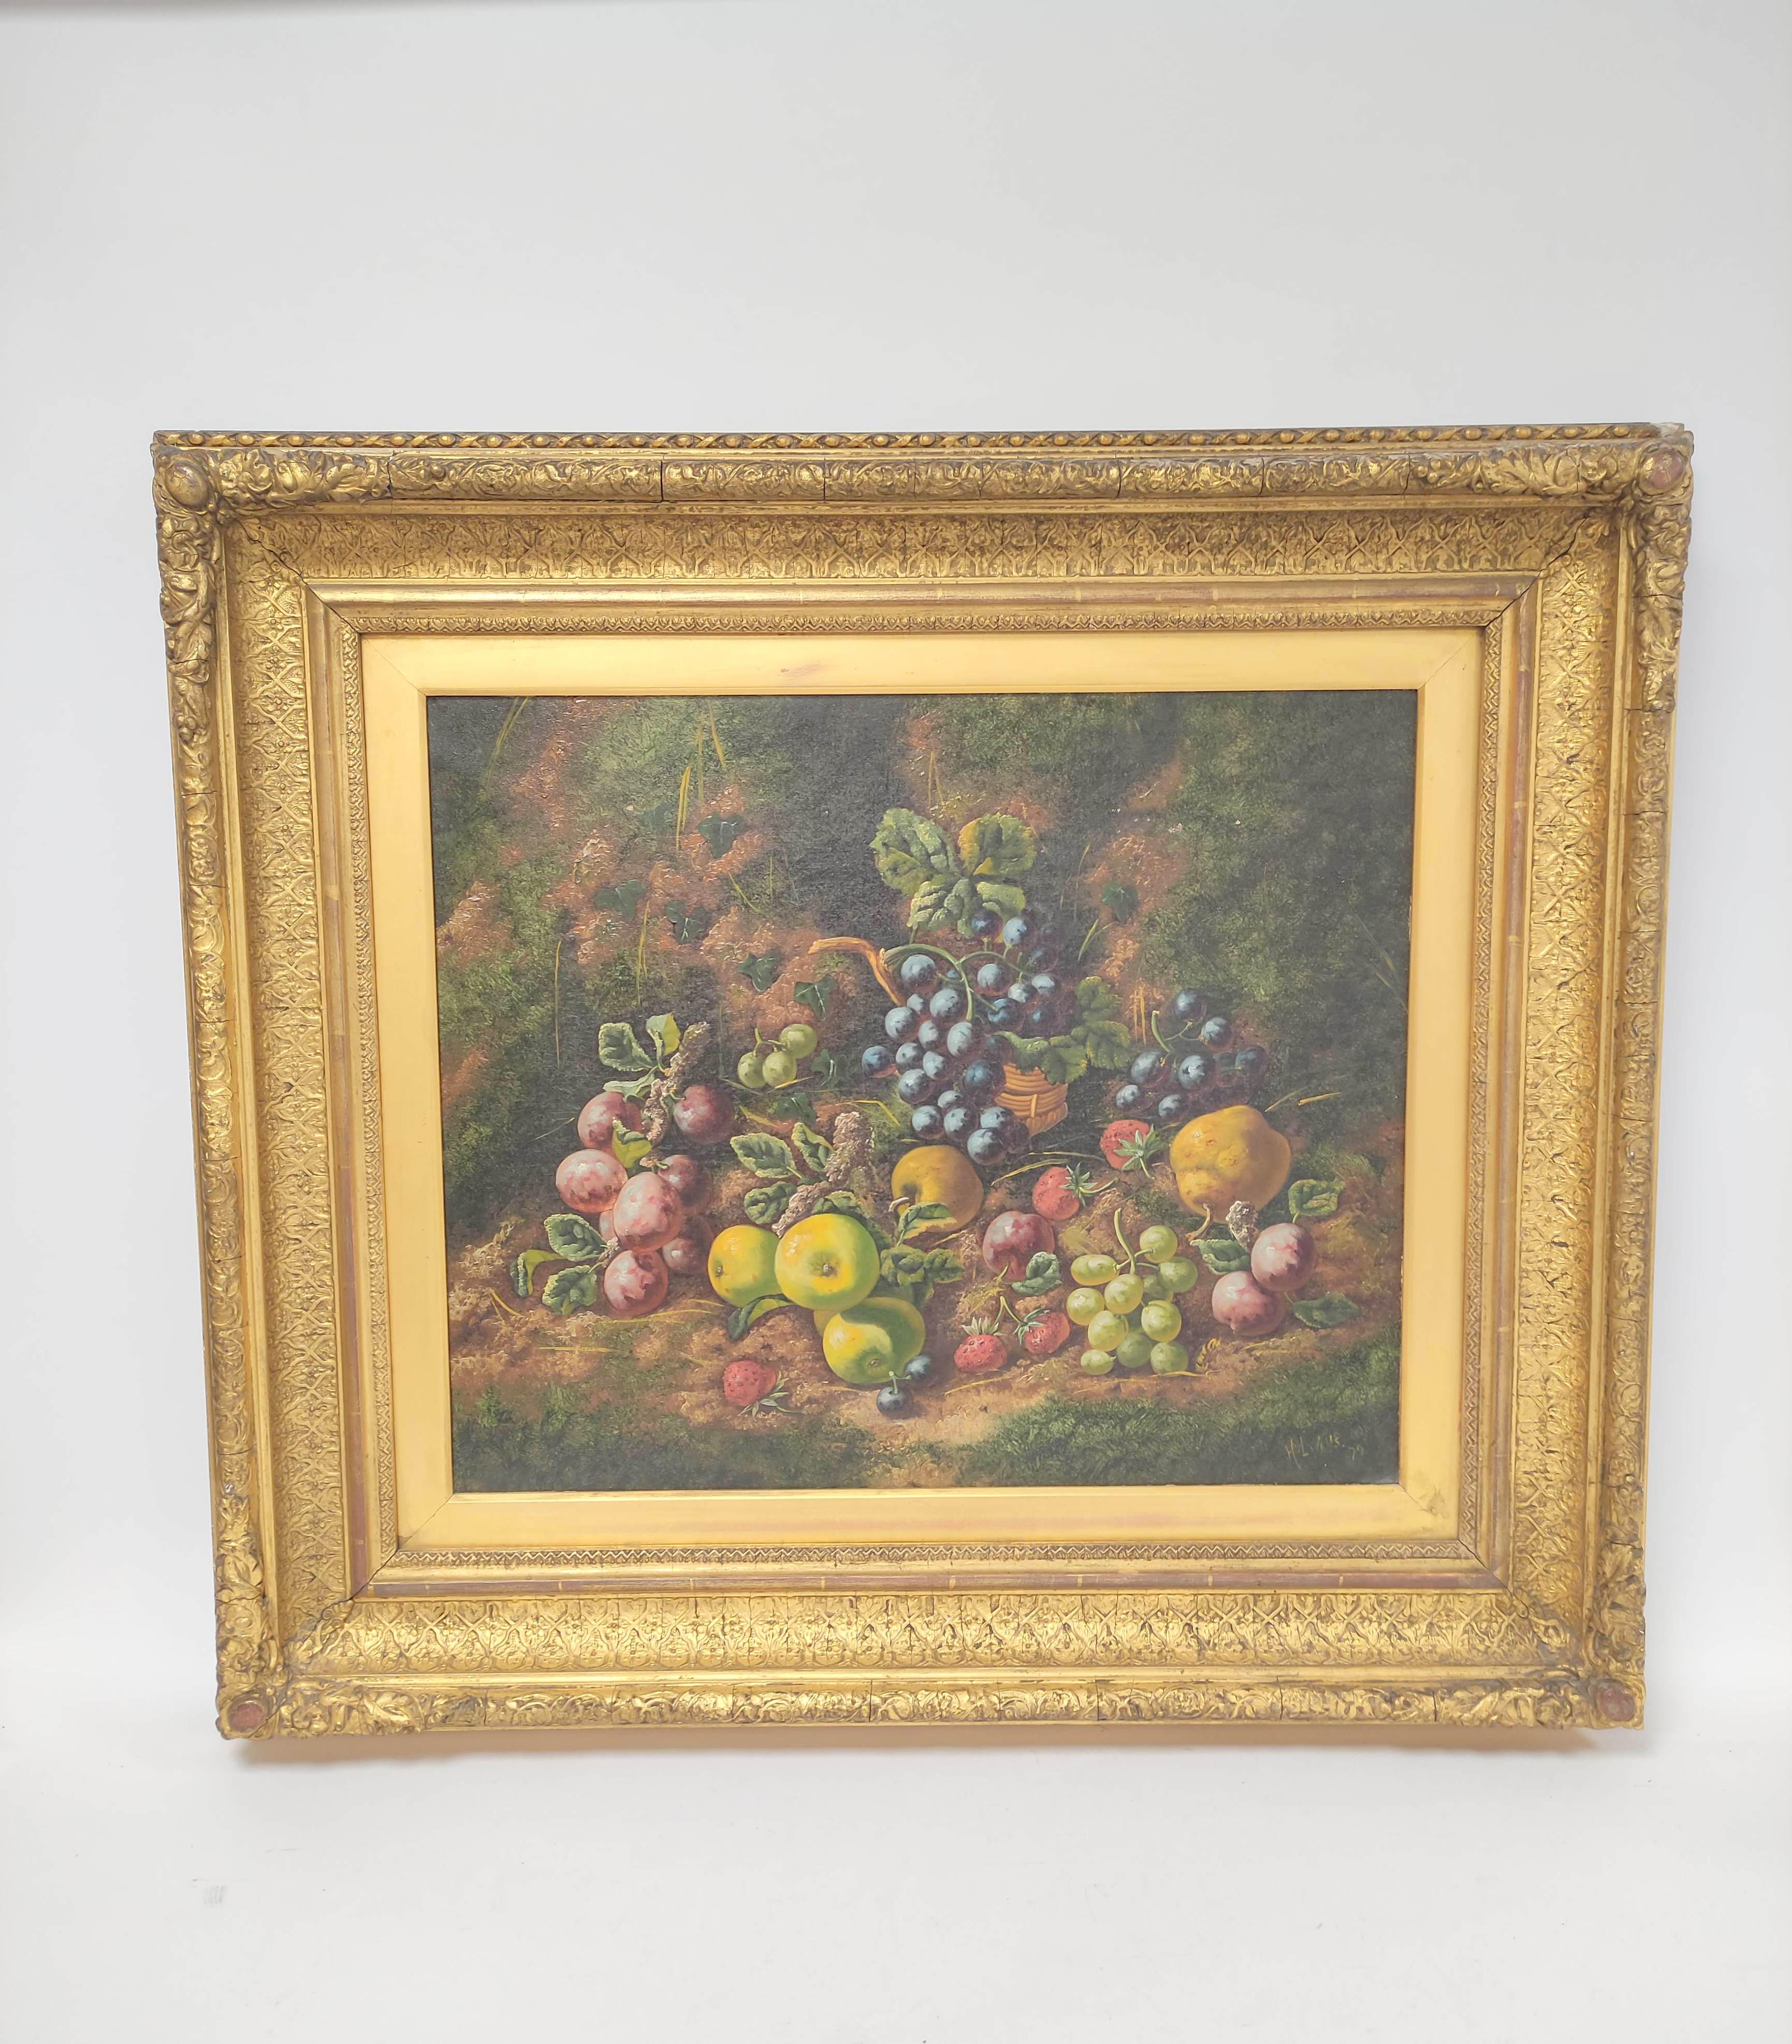 H. L. Wills Fruit against a mossy bank. Oil on canvas. Signed & dated (18)79. 49cms x 59cms.